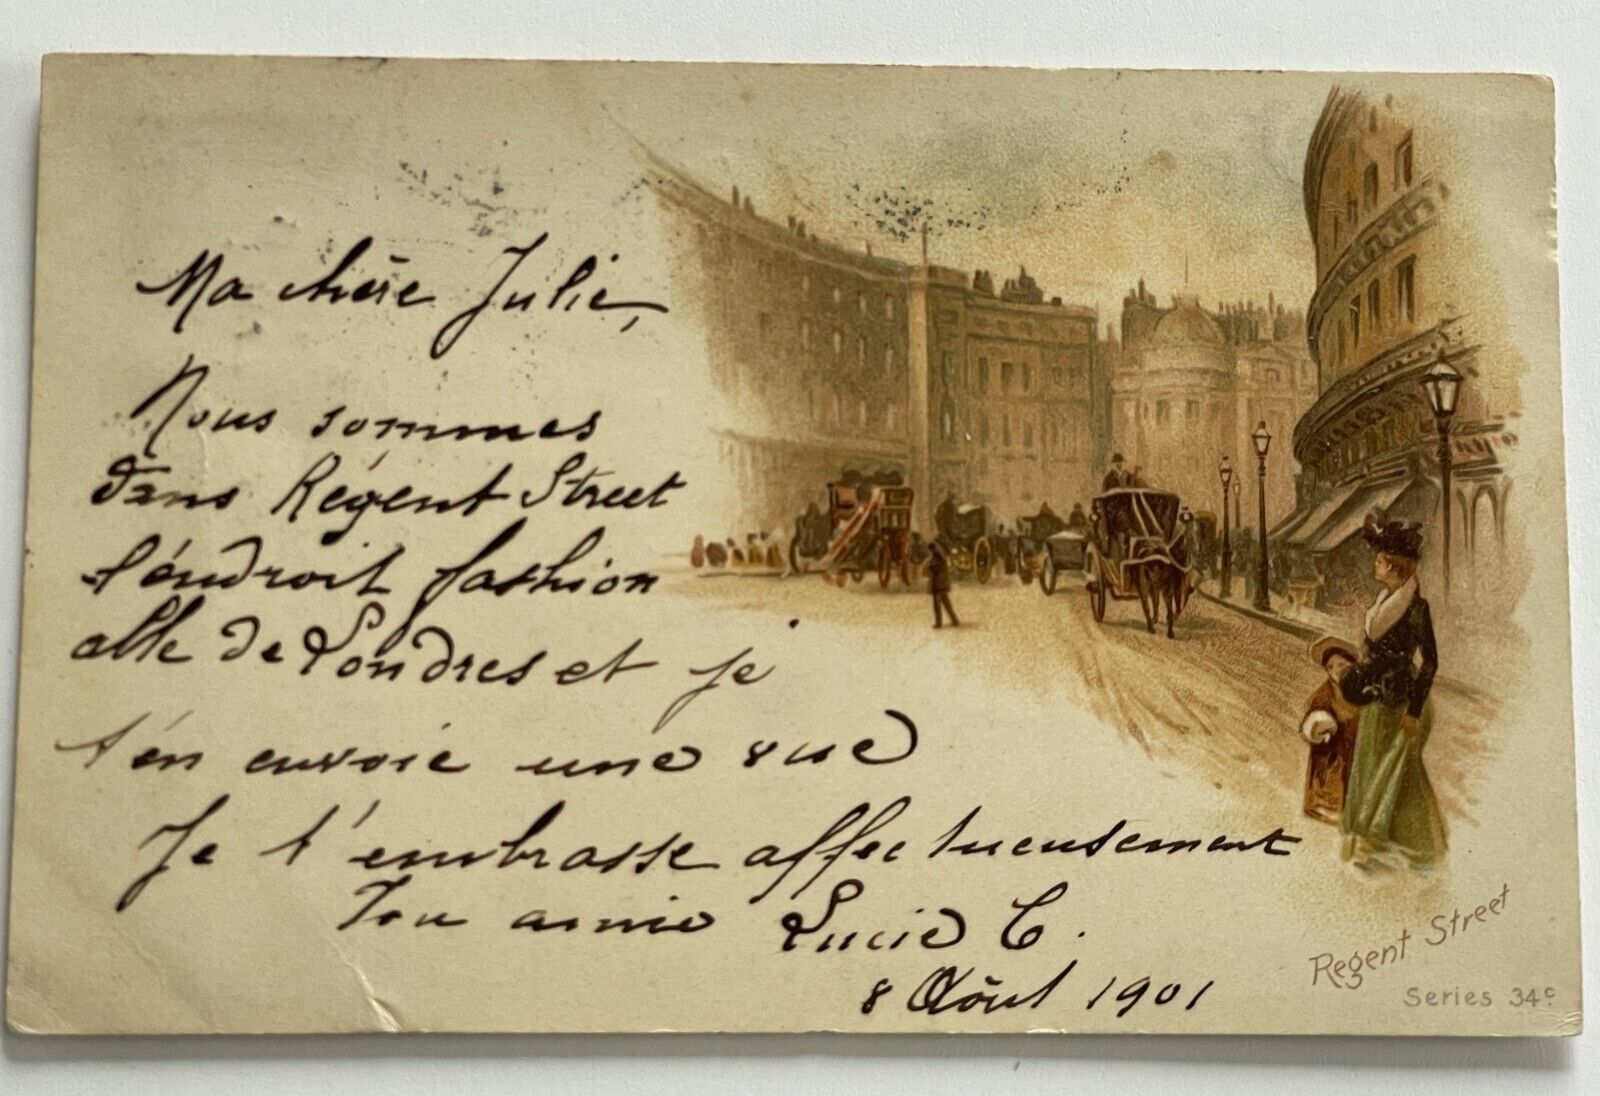 Vintage Postcard of the Regent Street, Paris, 1901 posted with stamp and text